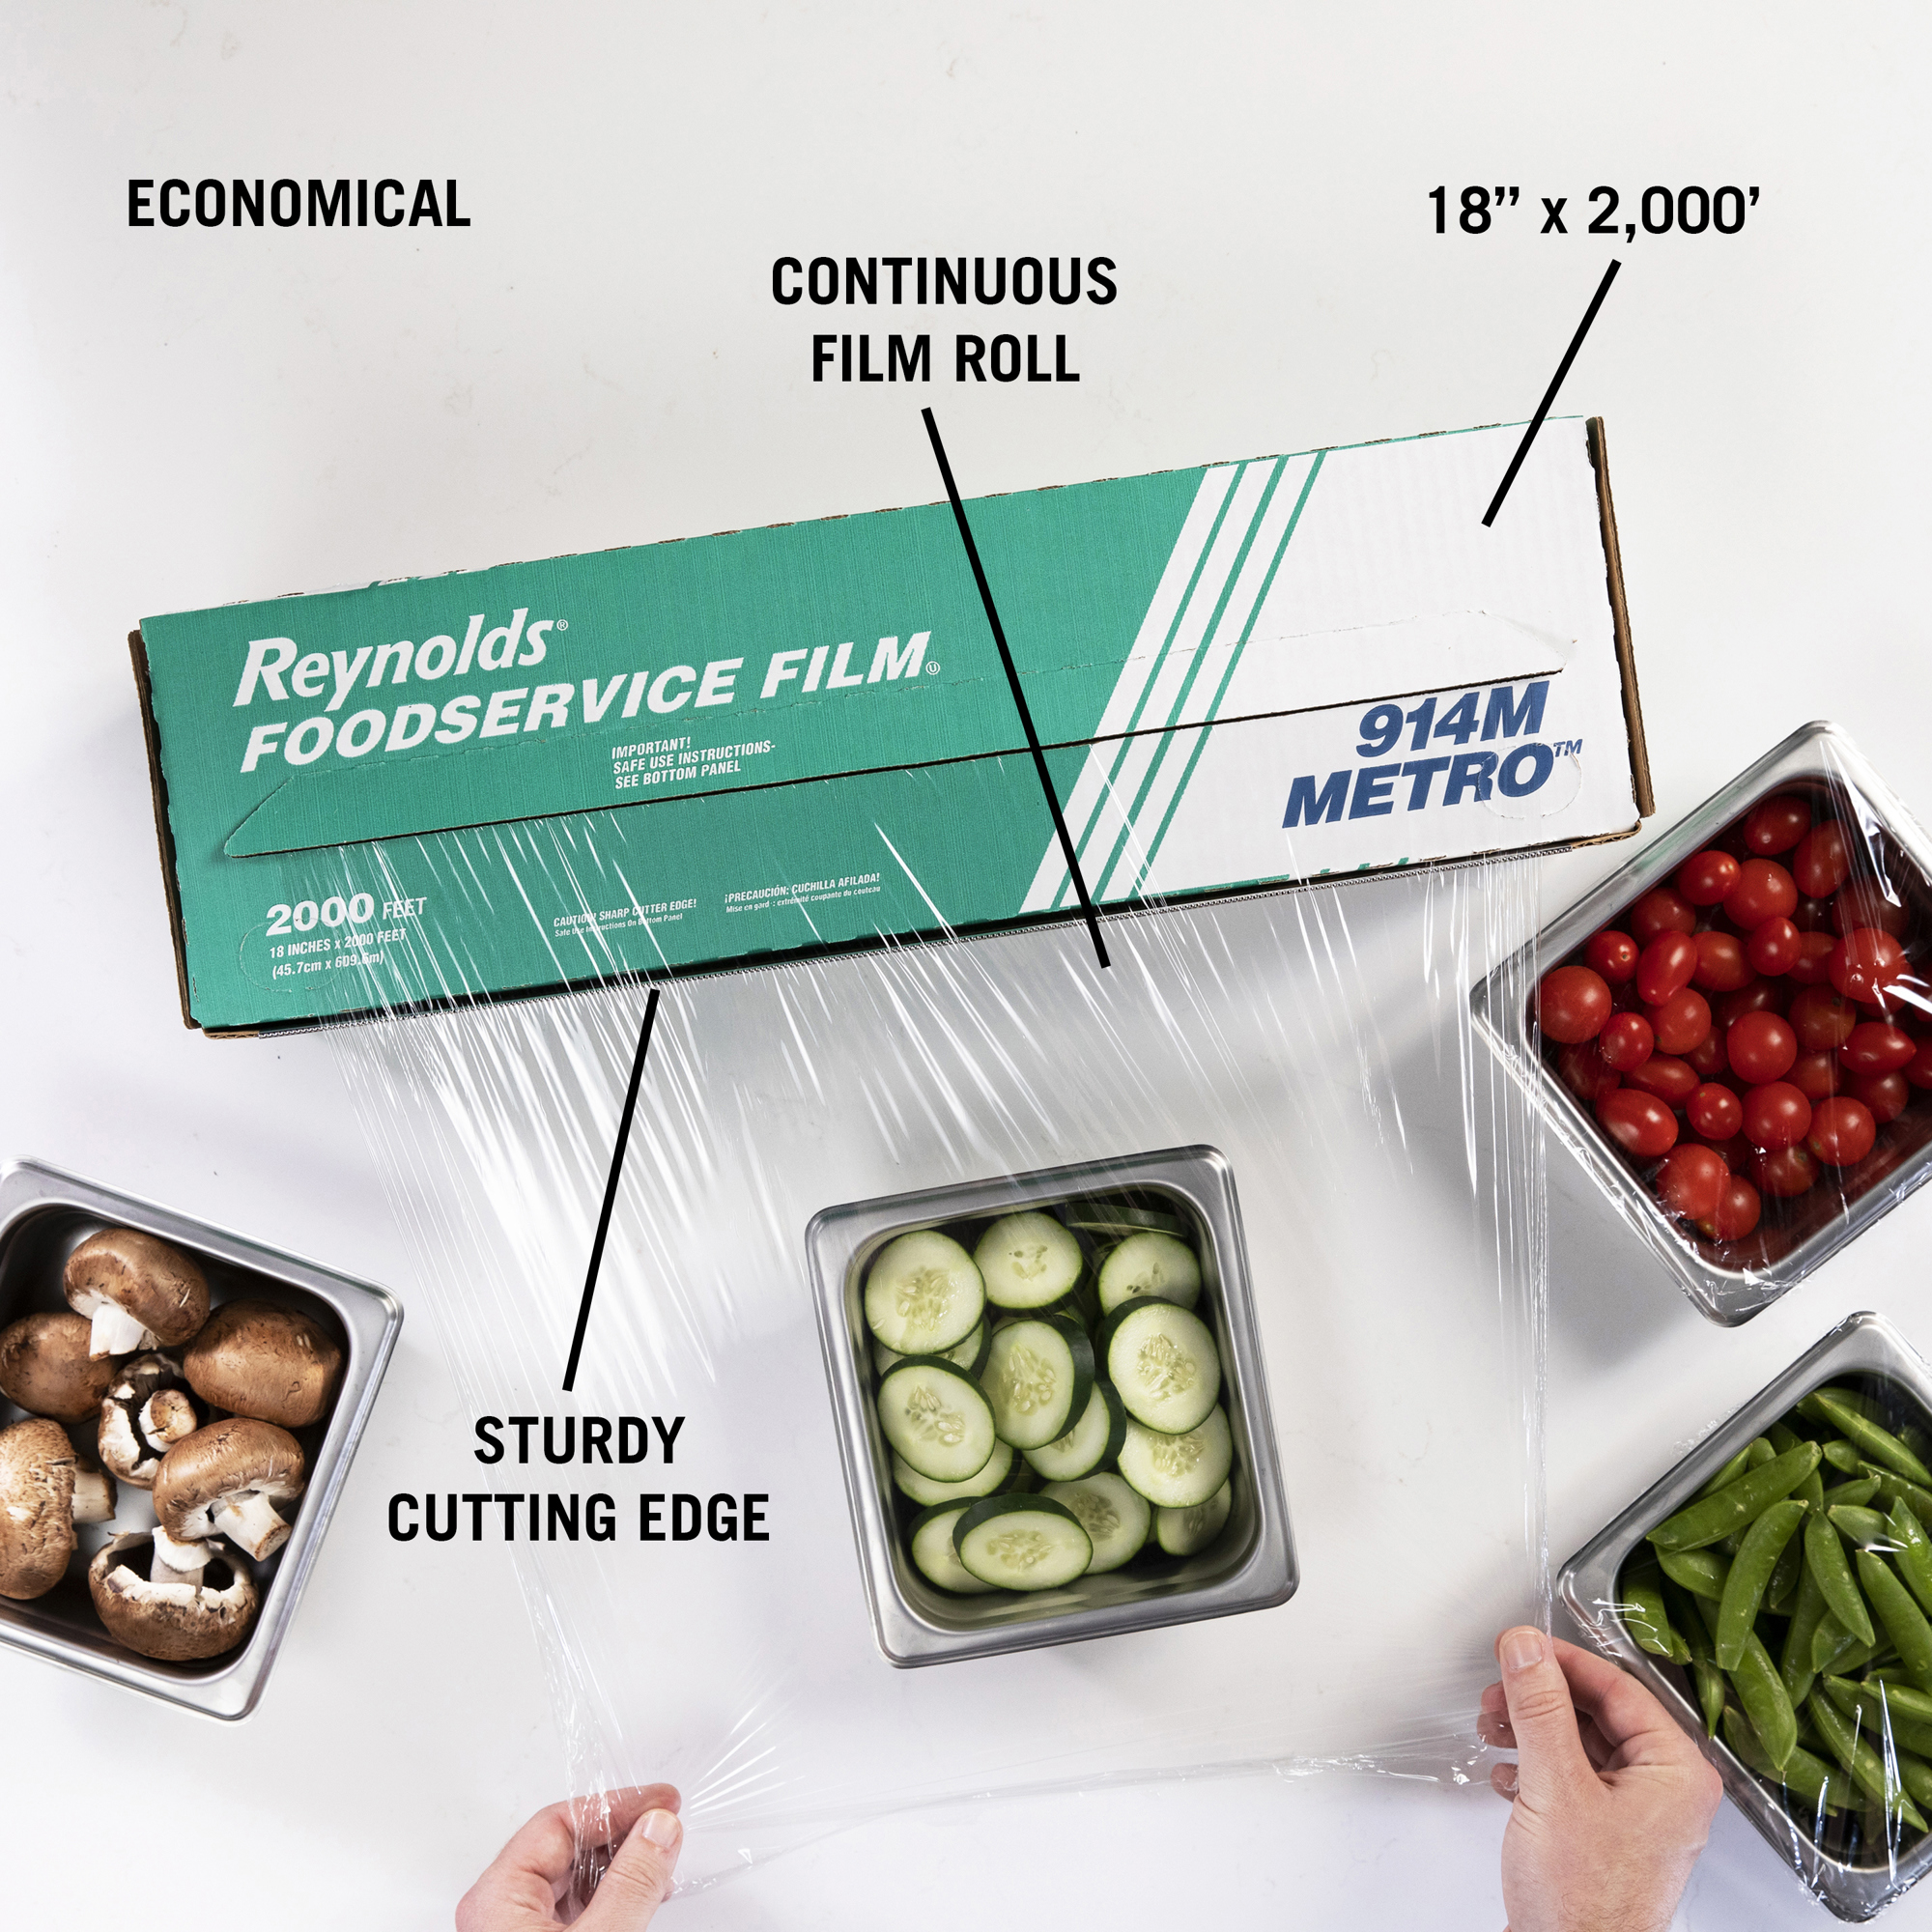 Reynolds 12 Food Packaging Foodservice Wrap, Clear